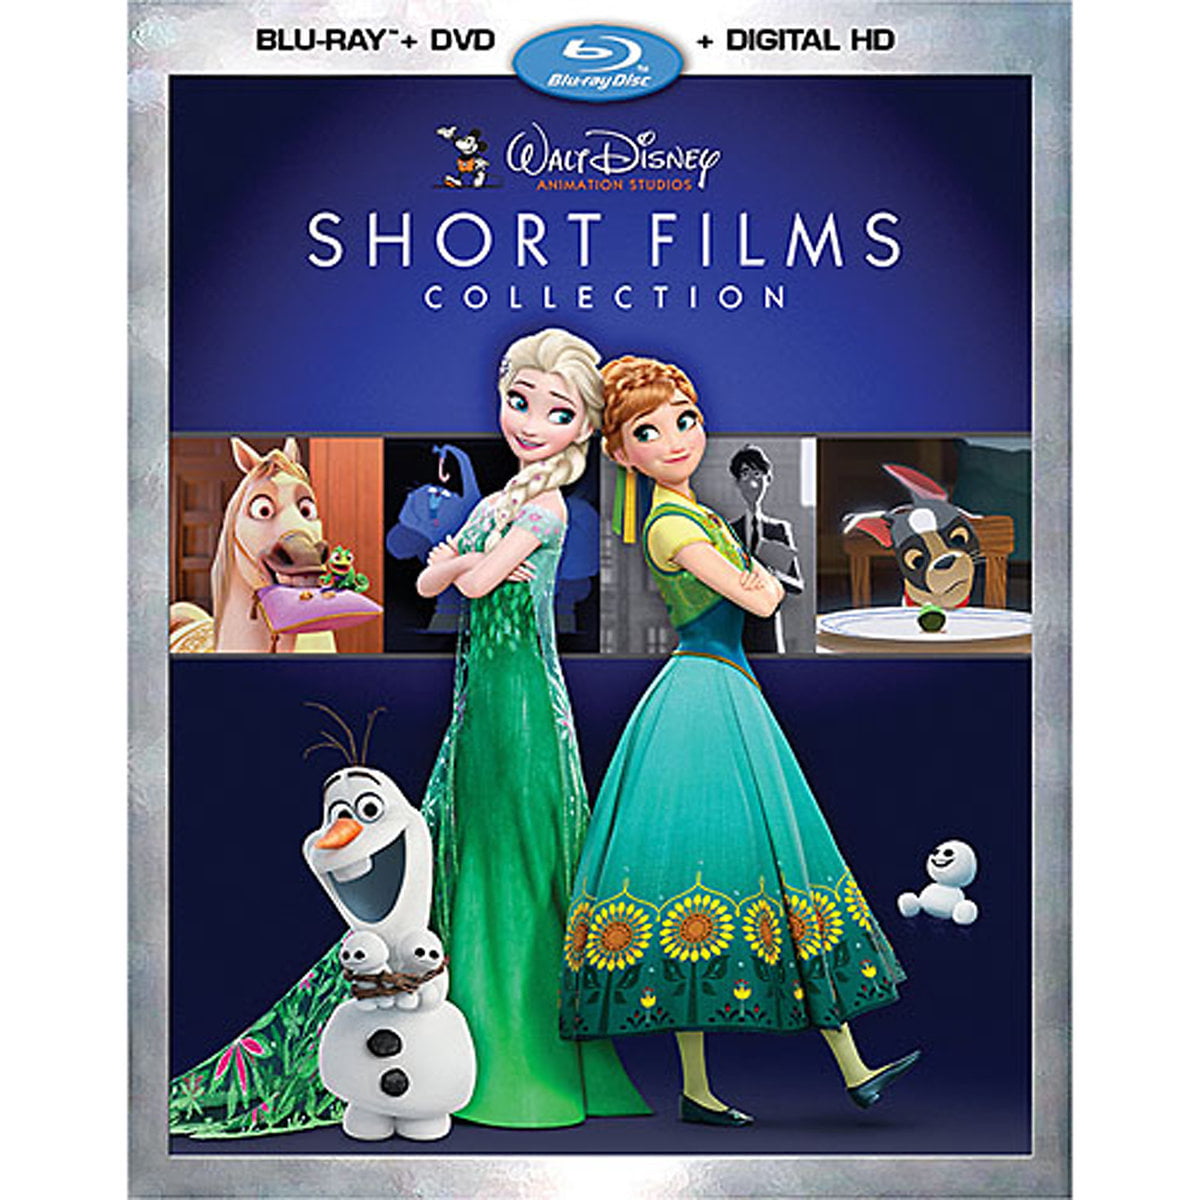 Pre-owned - Walt Disney Animation Studios Short Films Collection (Blu-ray +  DVD) 